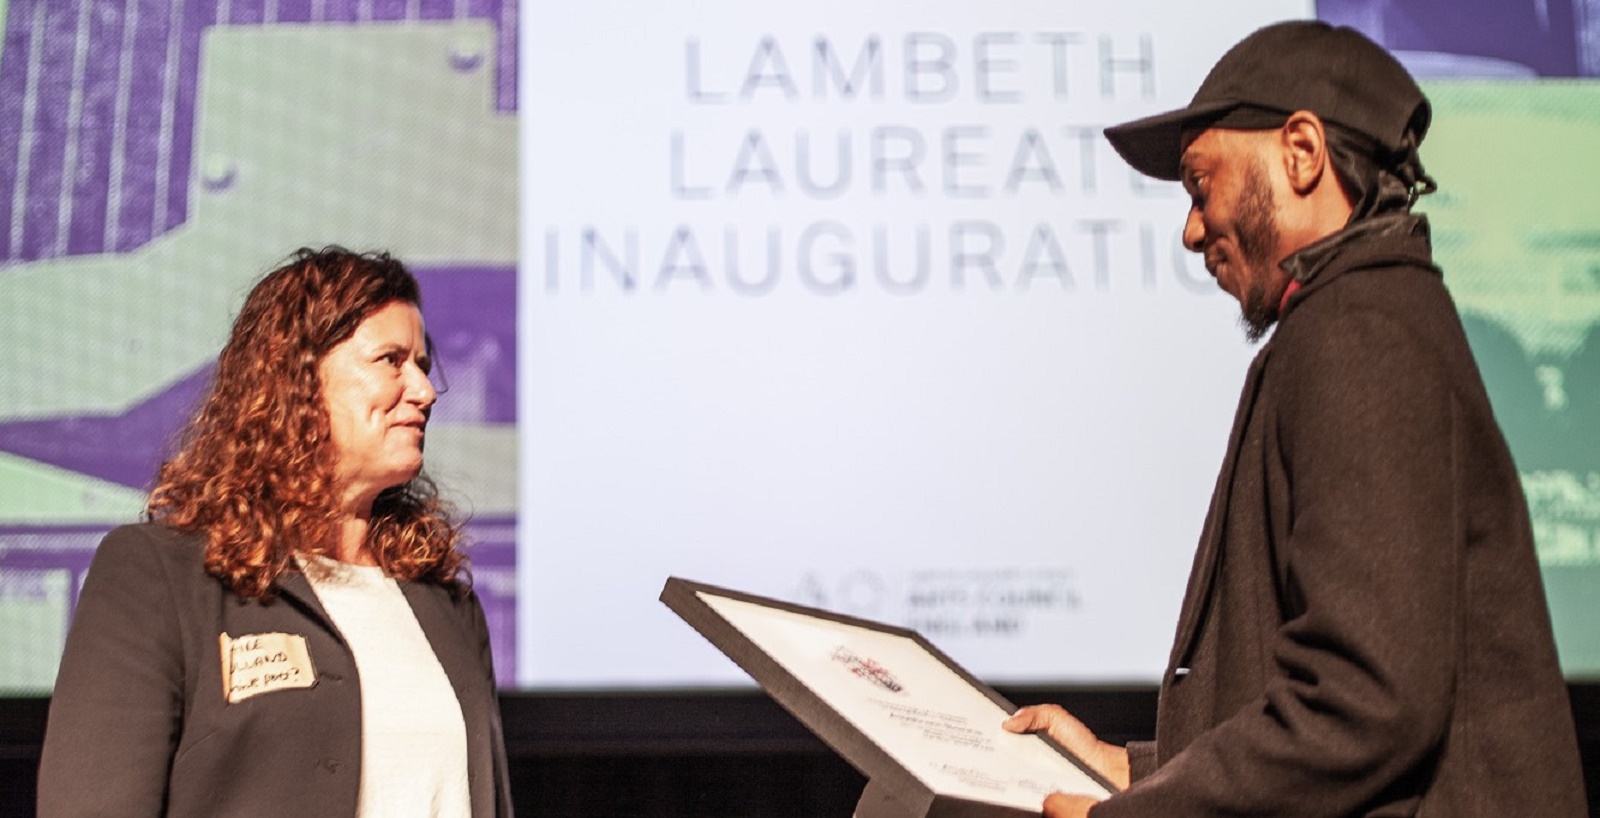 A Laureate for Lambeth